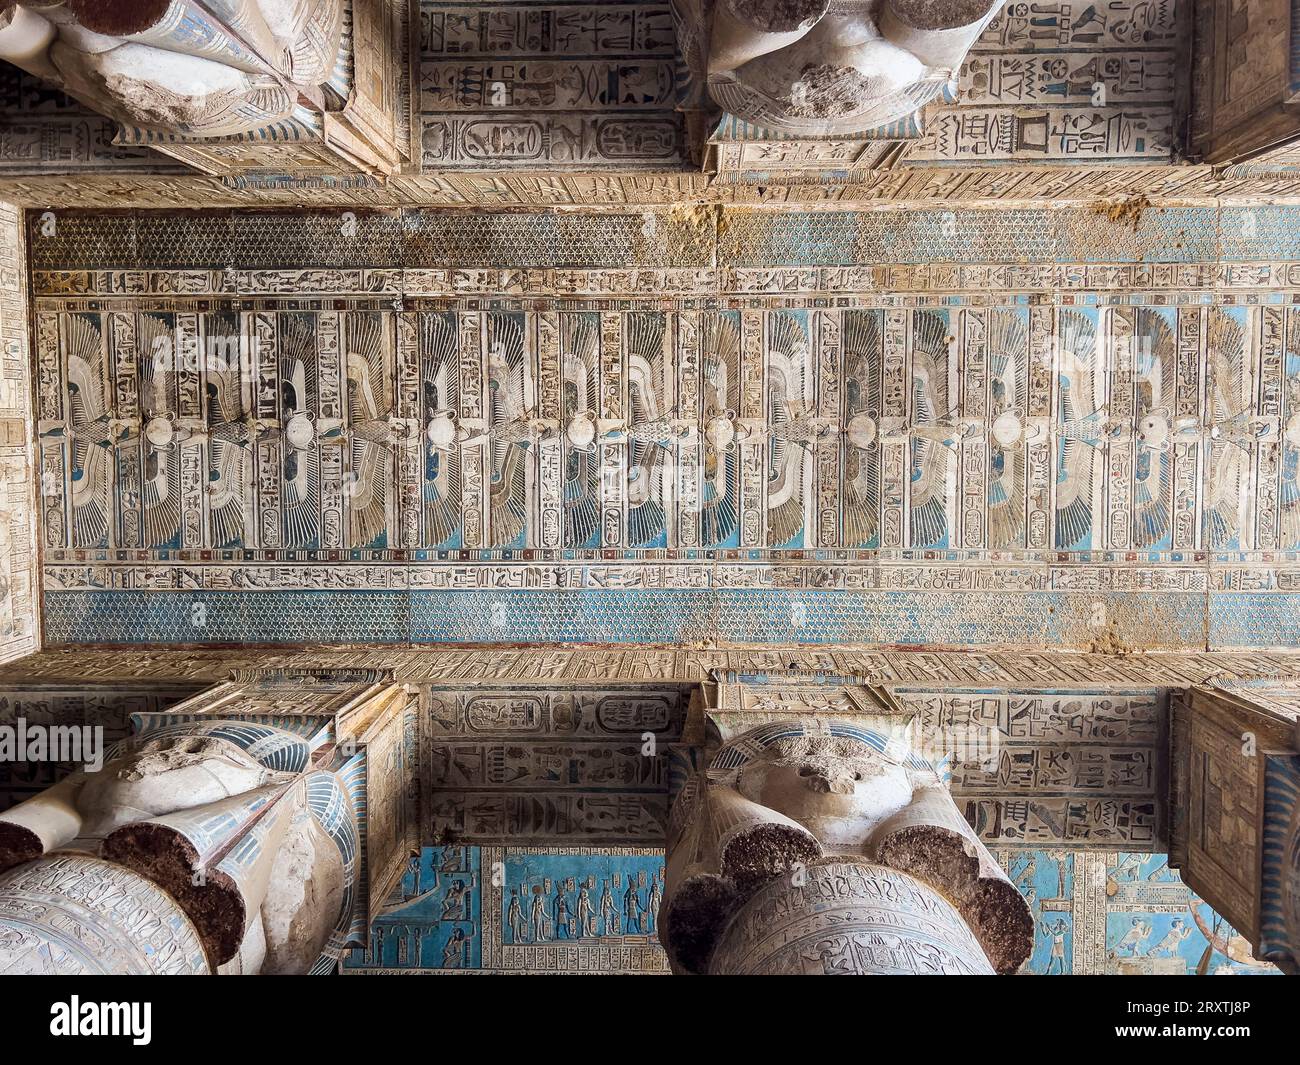 Details of the ceiling inside the Hypostyle Hall, Temple of Hathor, Dendera Temple complex, Dendera, Egypt, North Africa, Africa Stock Photo